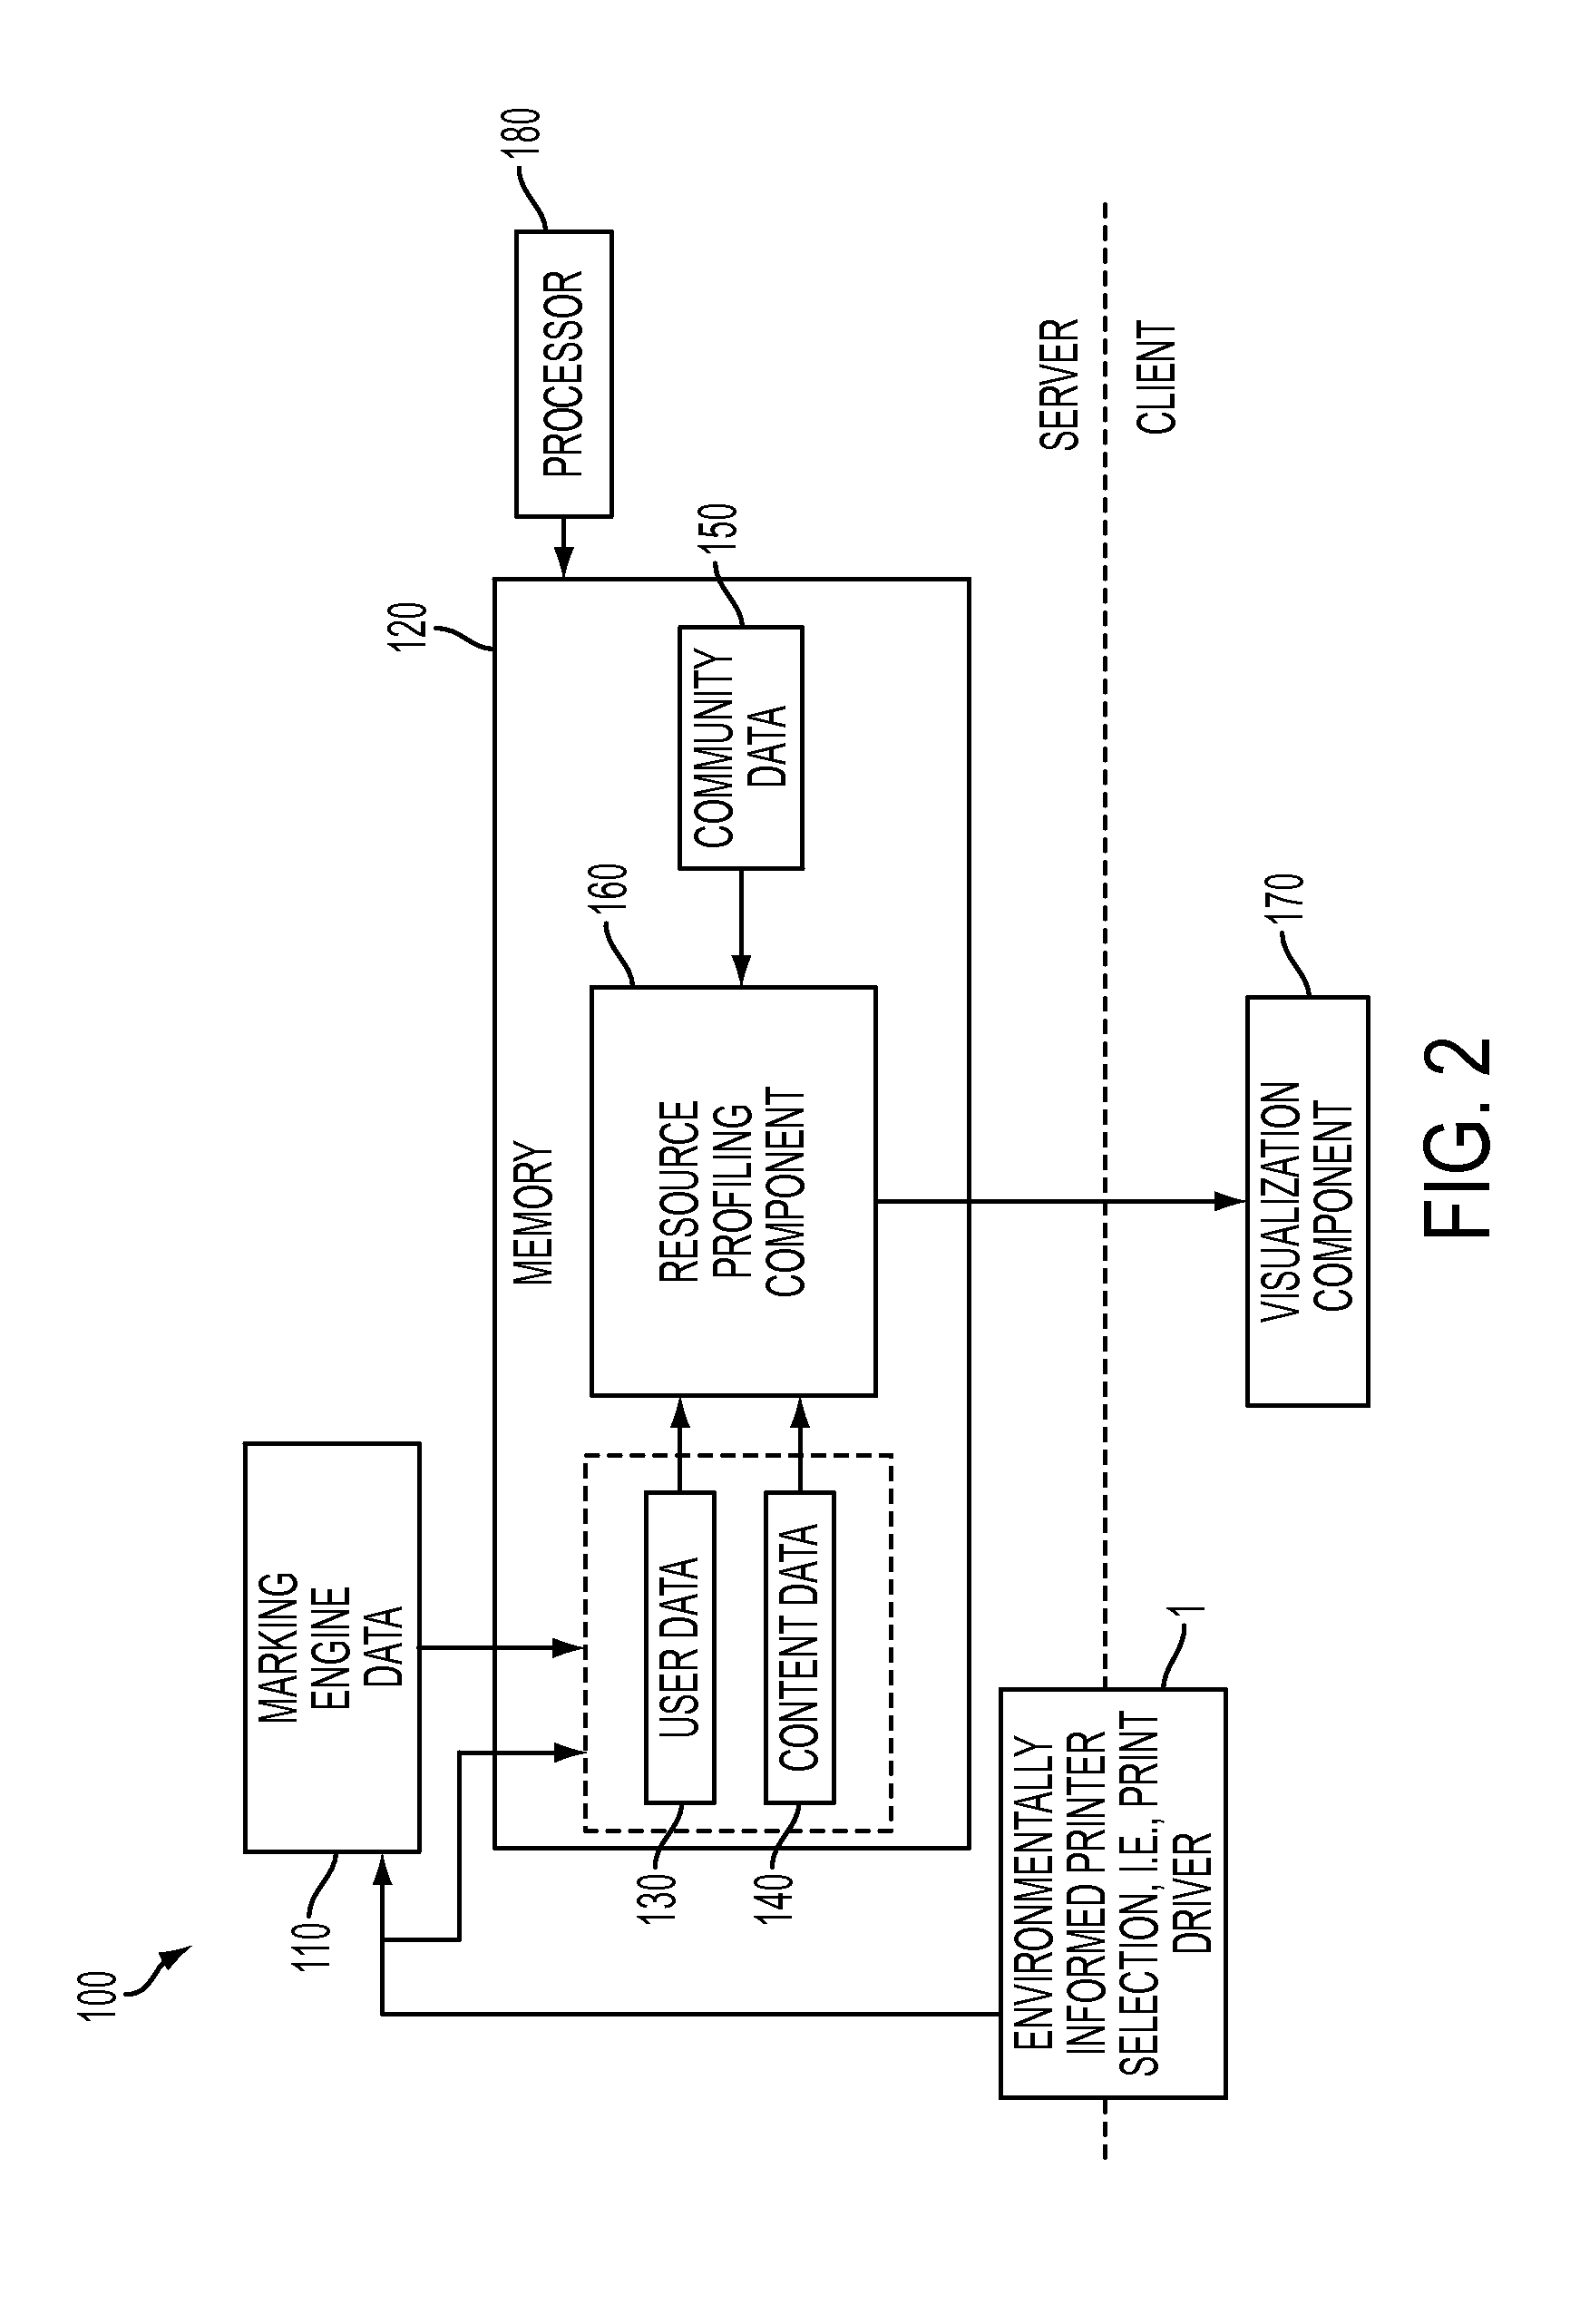 Method and system for mutual augmentation of a motivational printing awareness platform and recommendation-enabled printing drivers